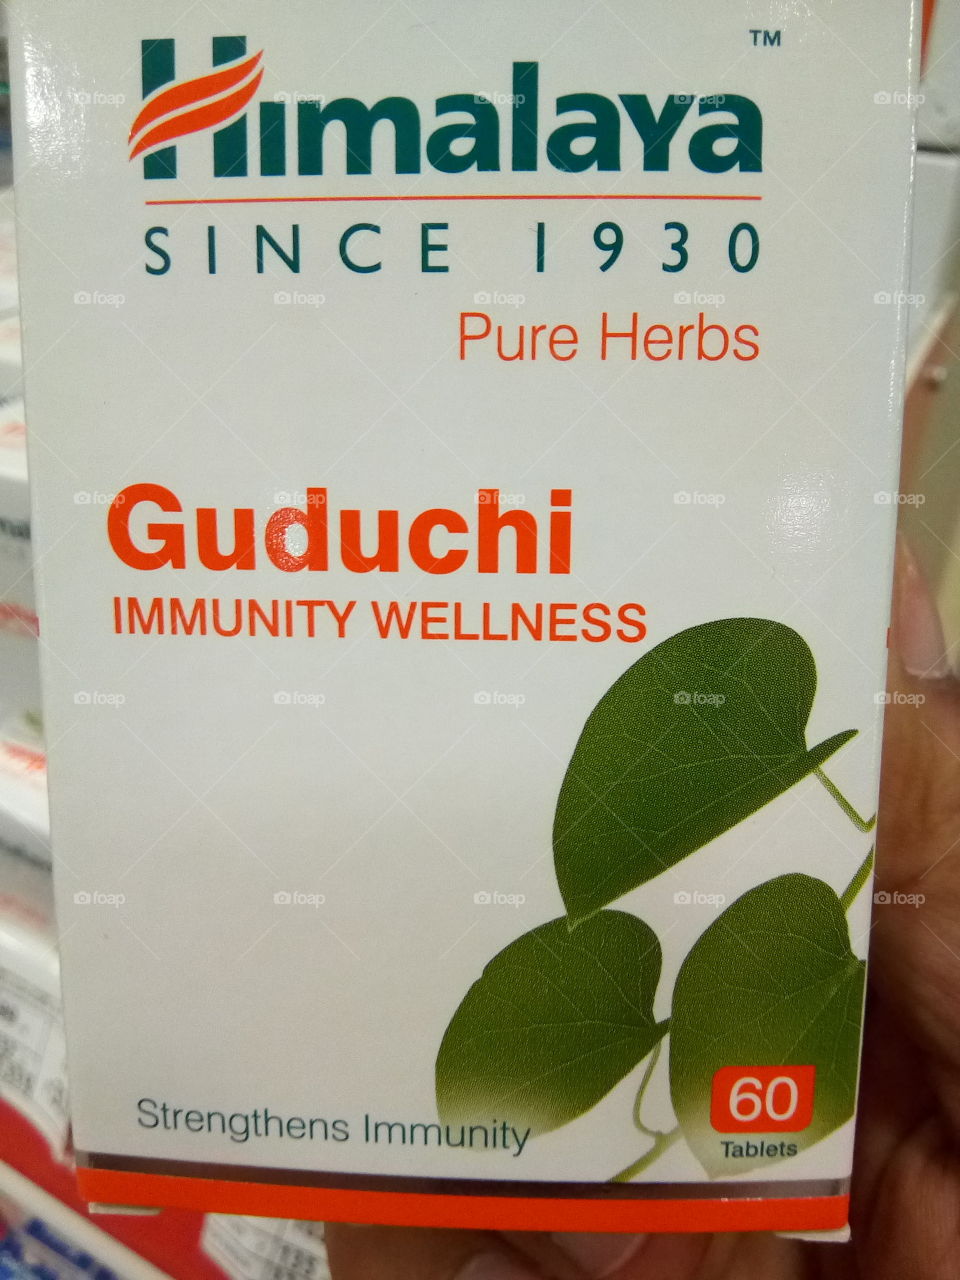 "Guduchi" a traditional medicine in India for immunity wellness- a product by HIMALAYA- AN AYURVEDIC COMPANY.